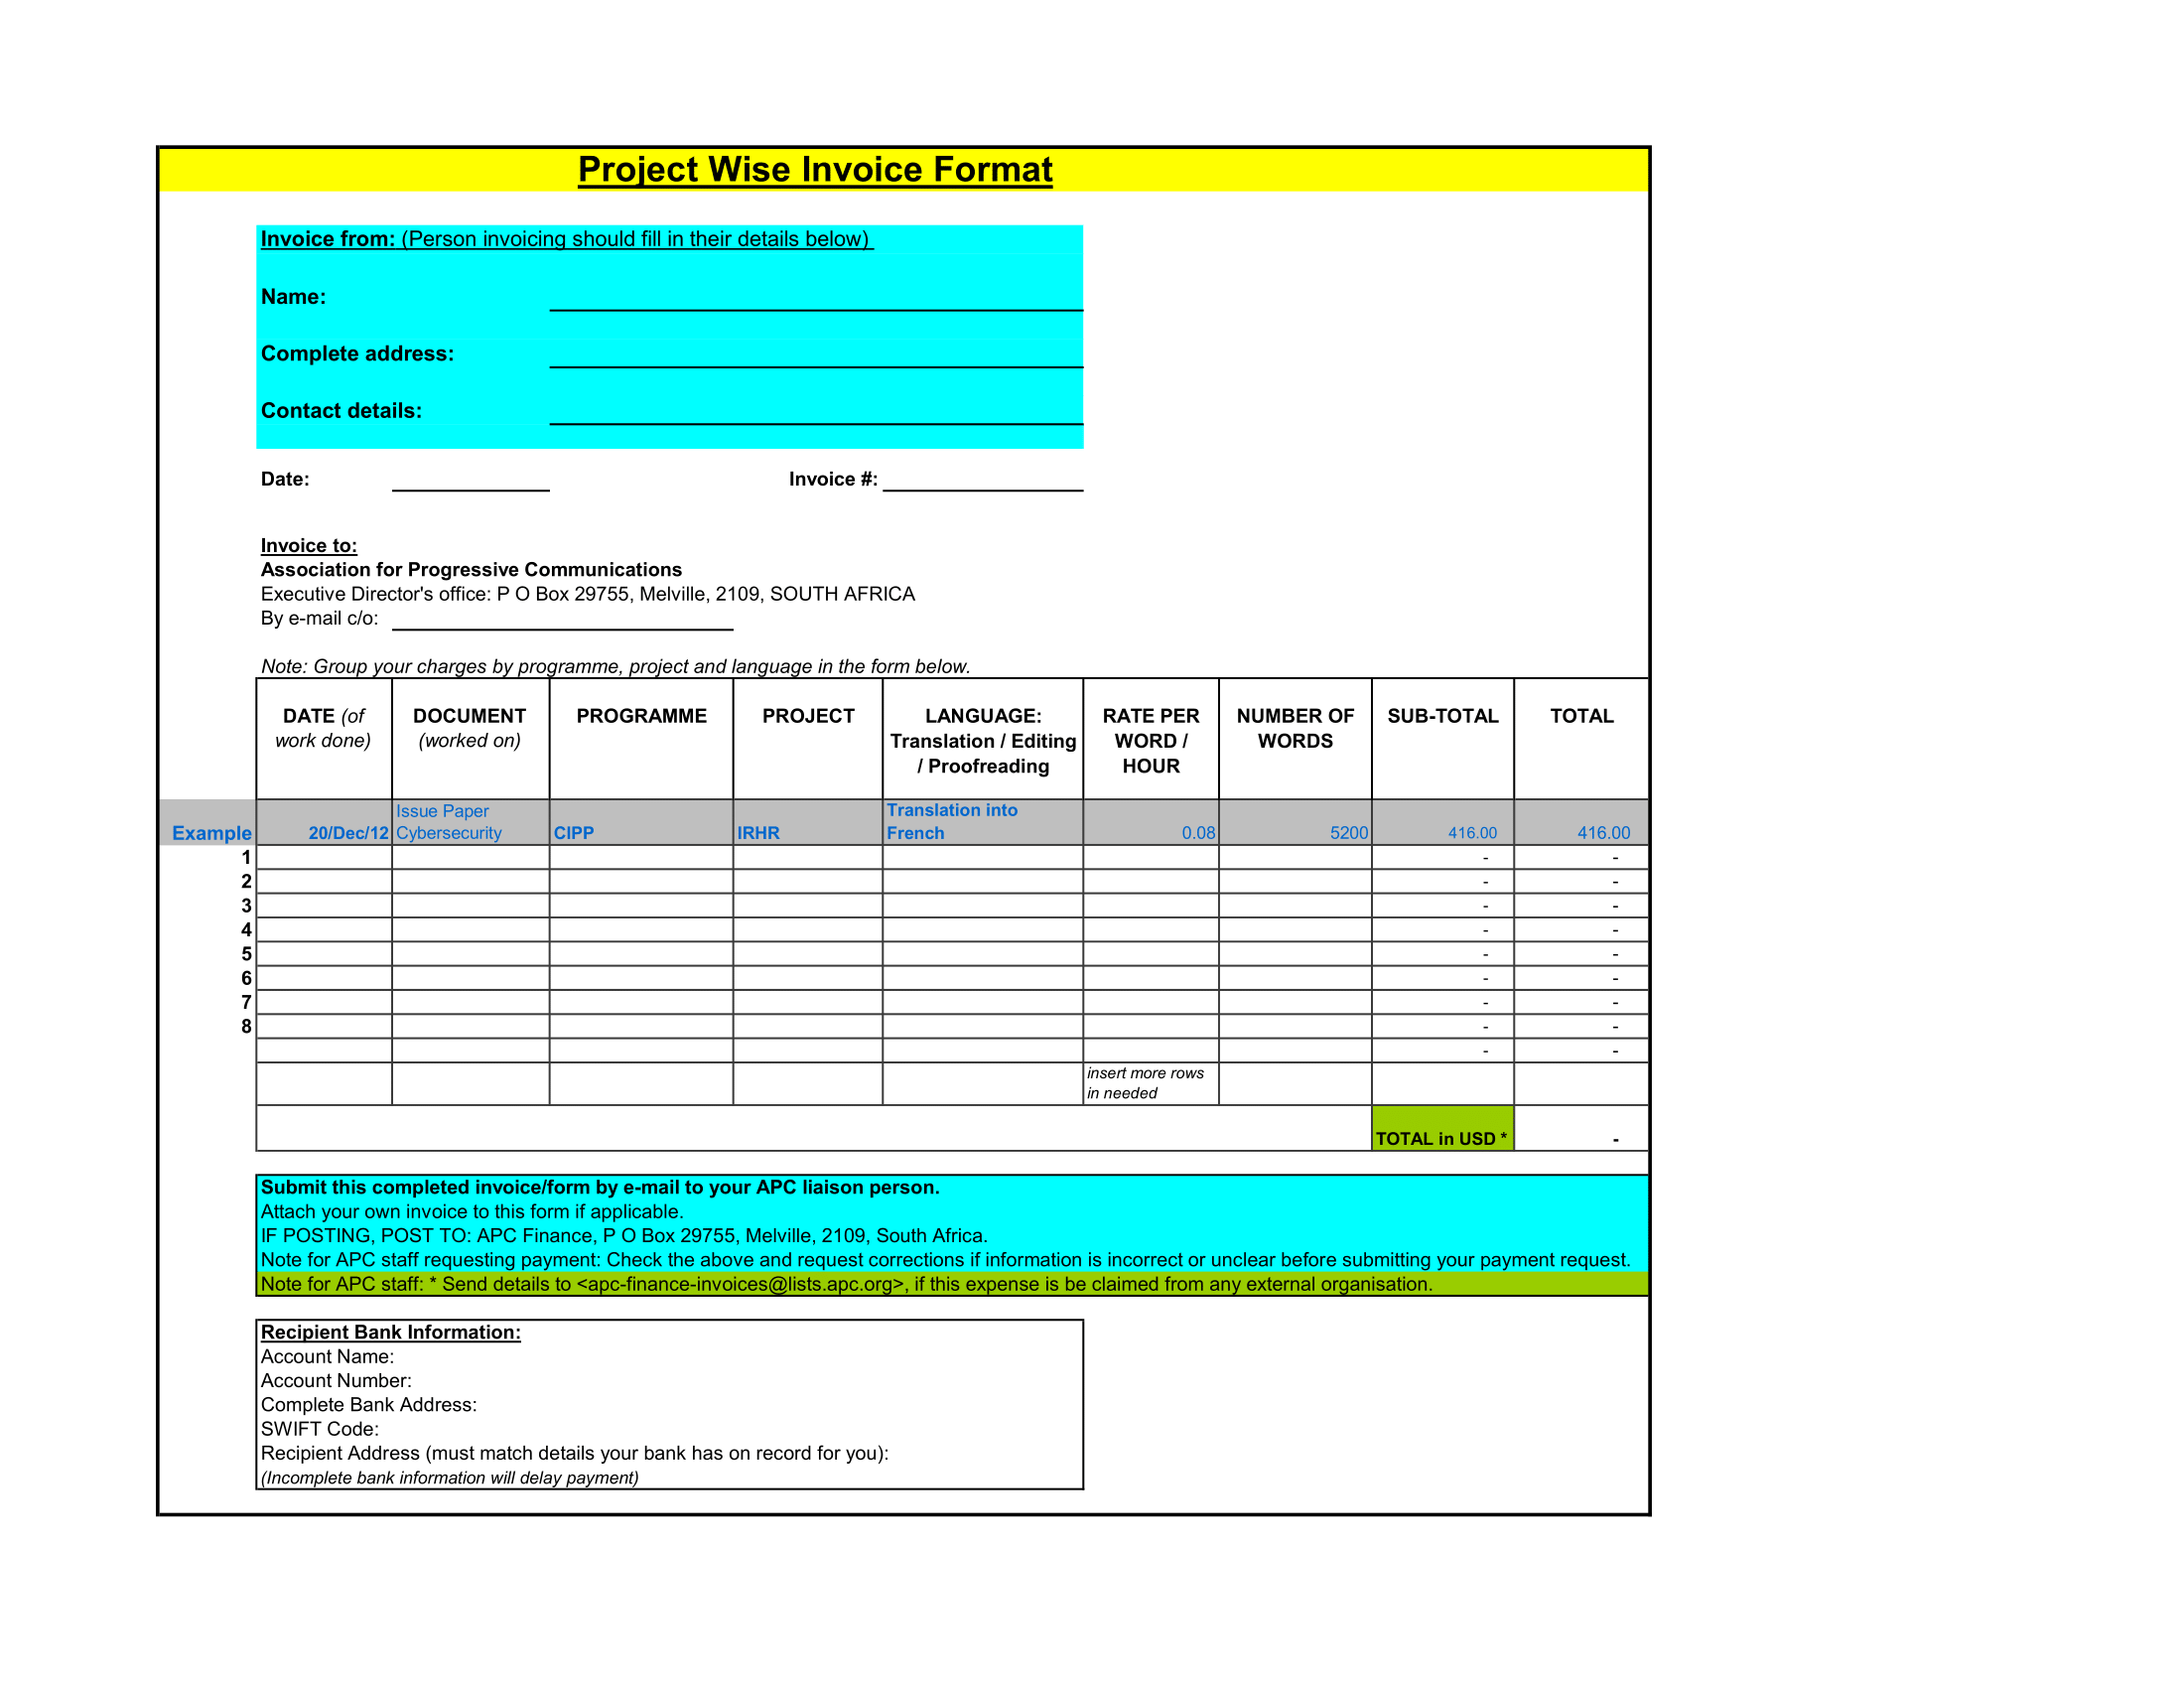 Project Wise Invoice Format in Excel